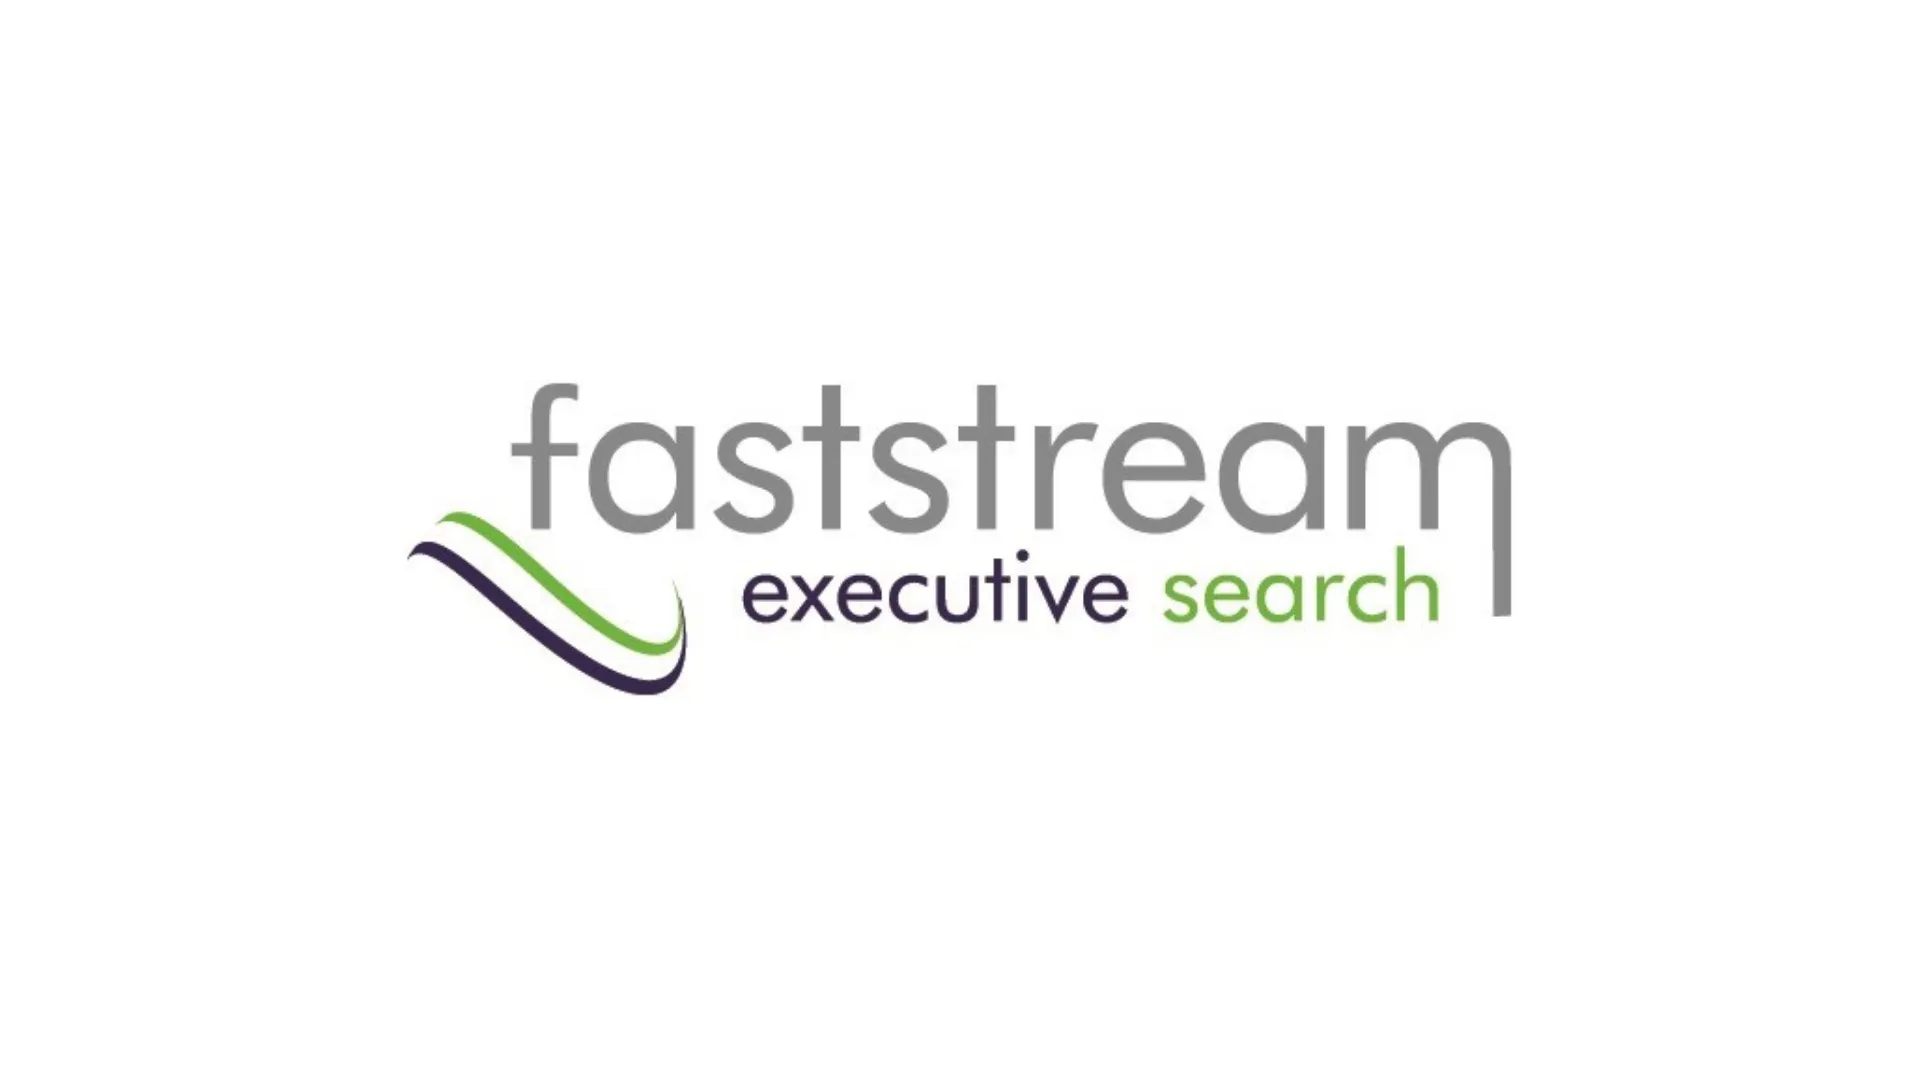 Mark Charman launches the Faststream Recruitment Executive Search brand